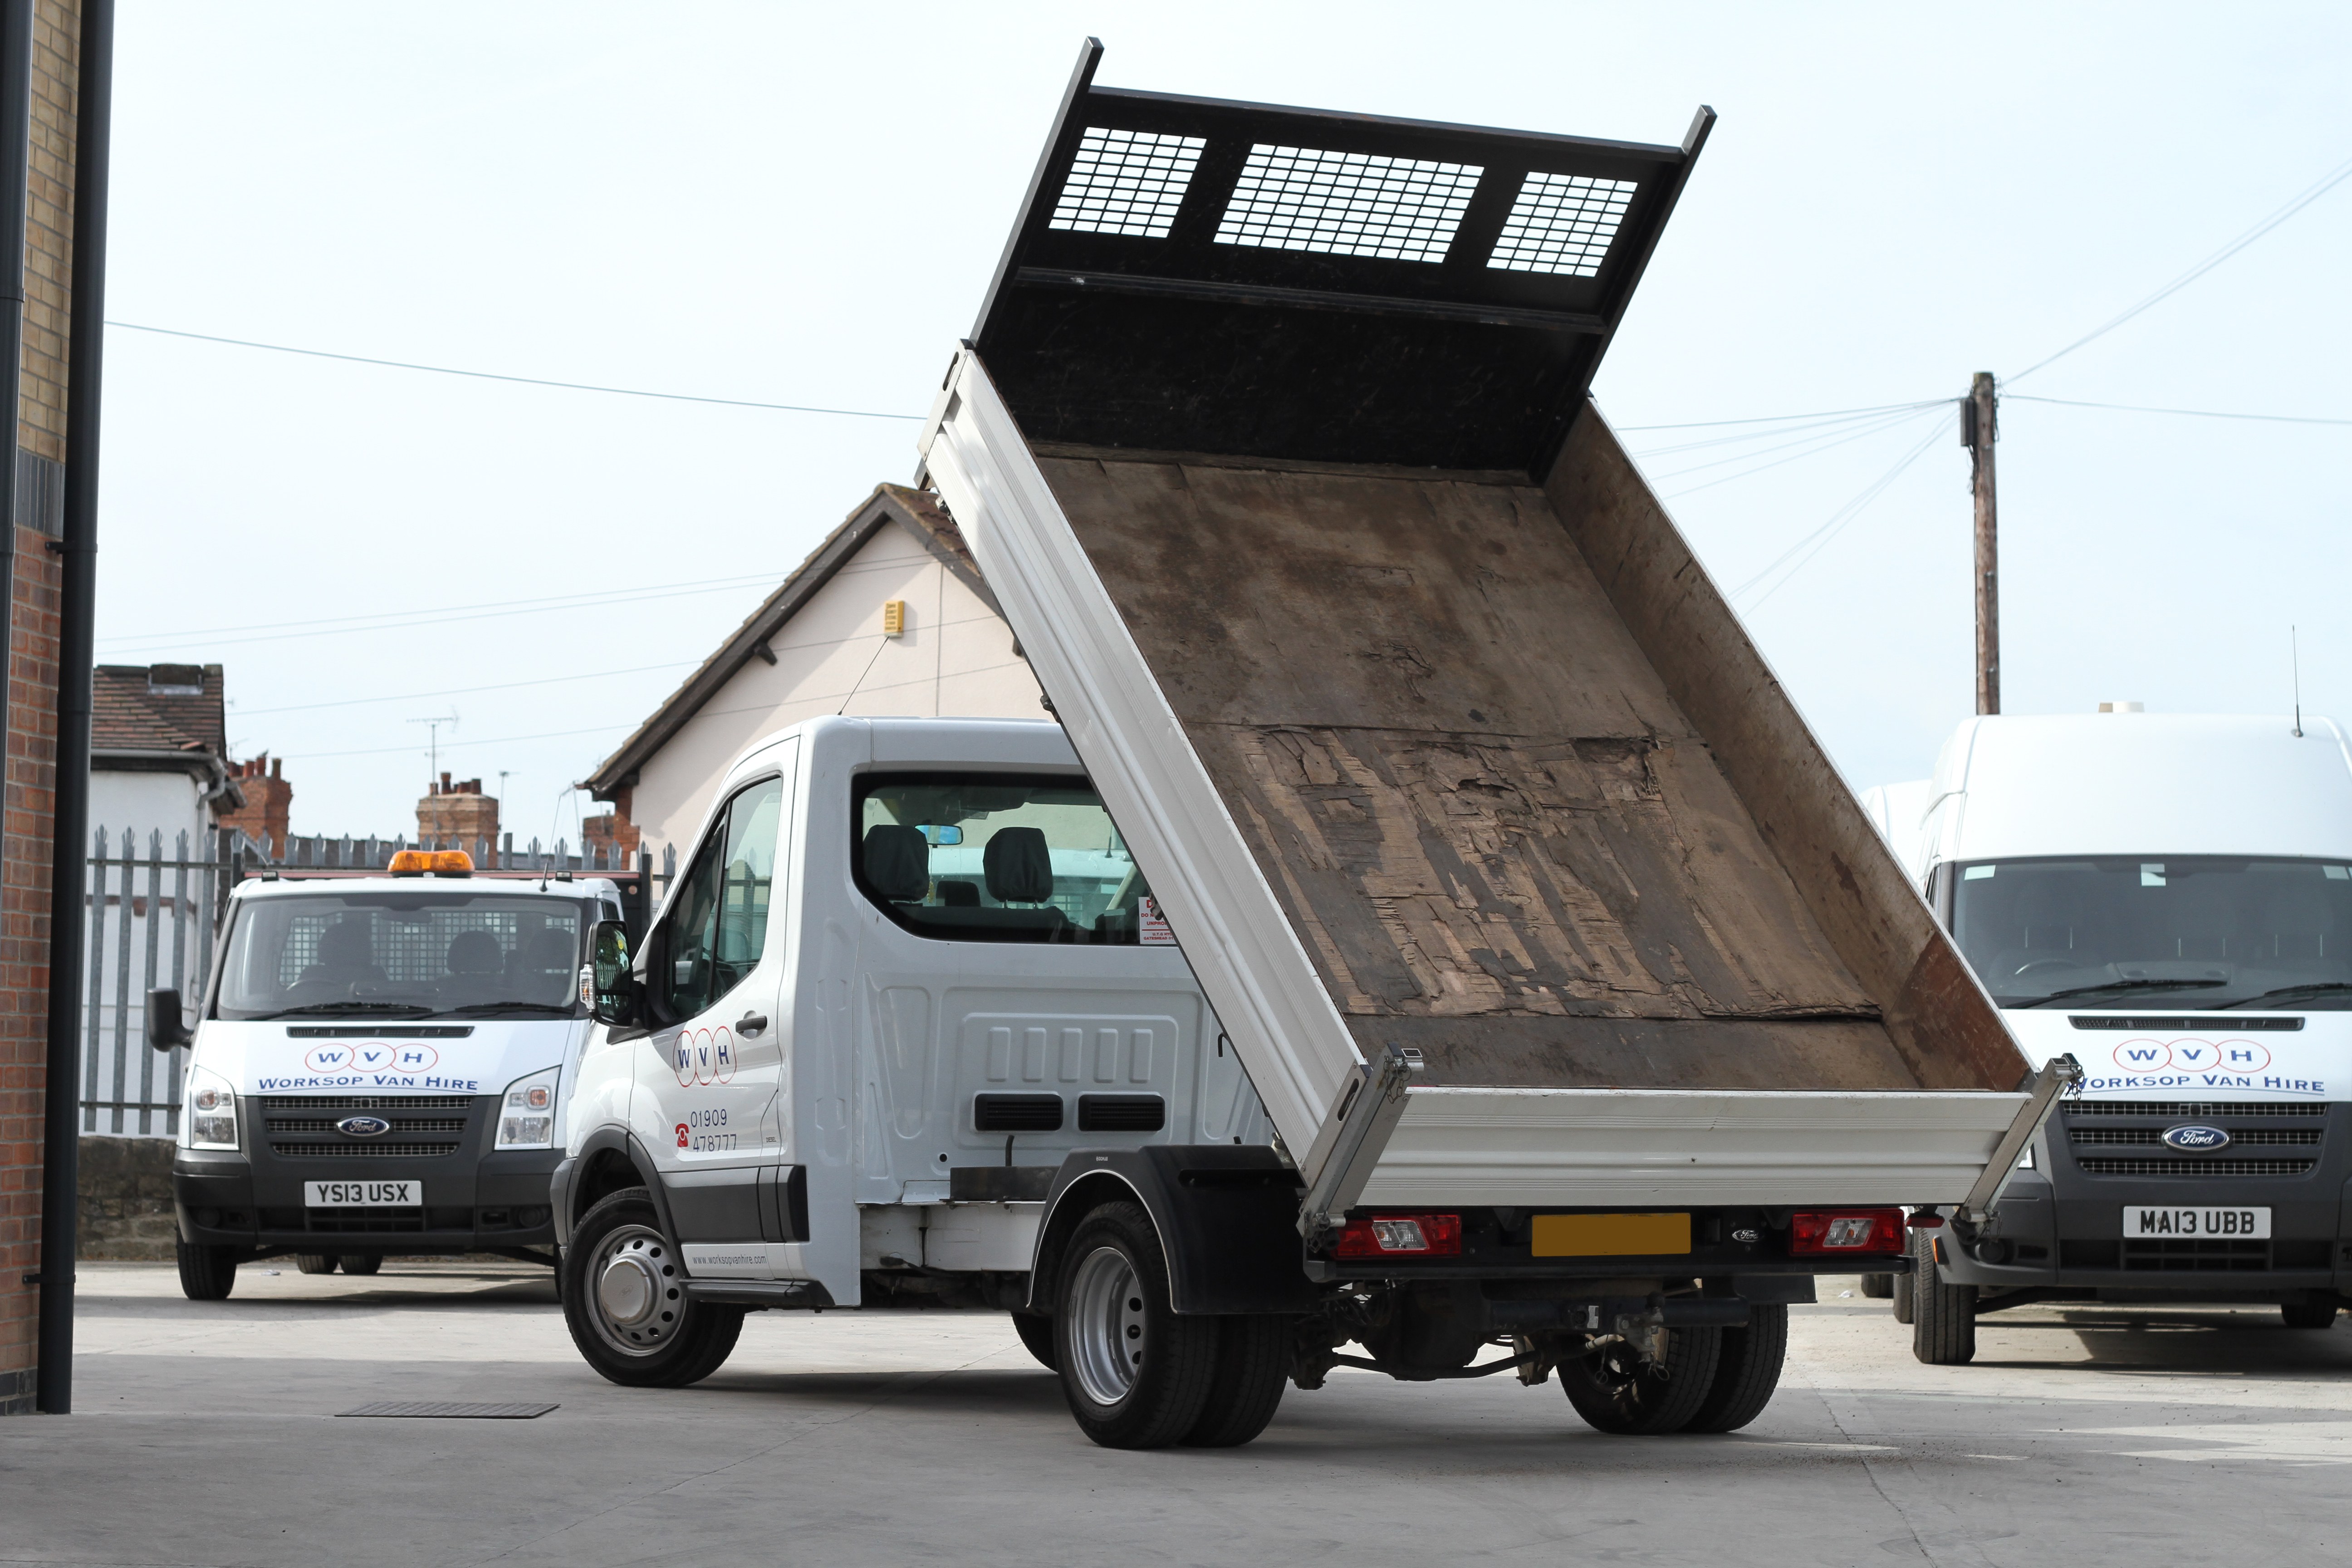 Tipper vans to be hired from Worksop Van Hire